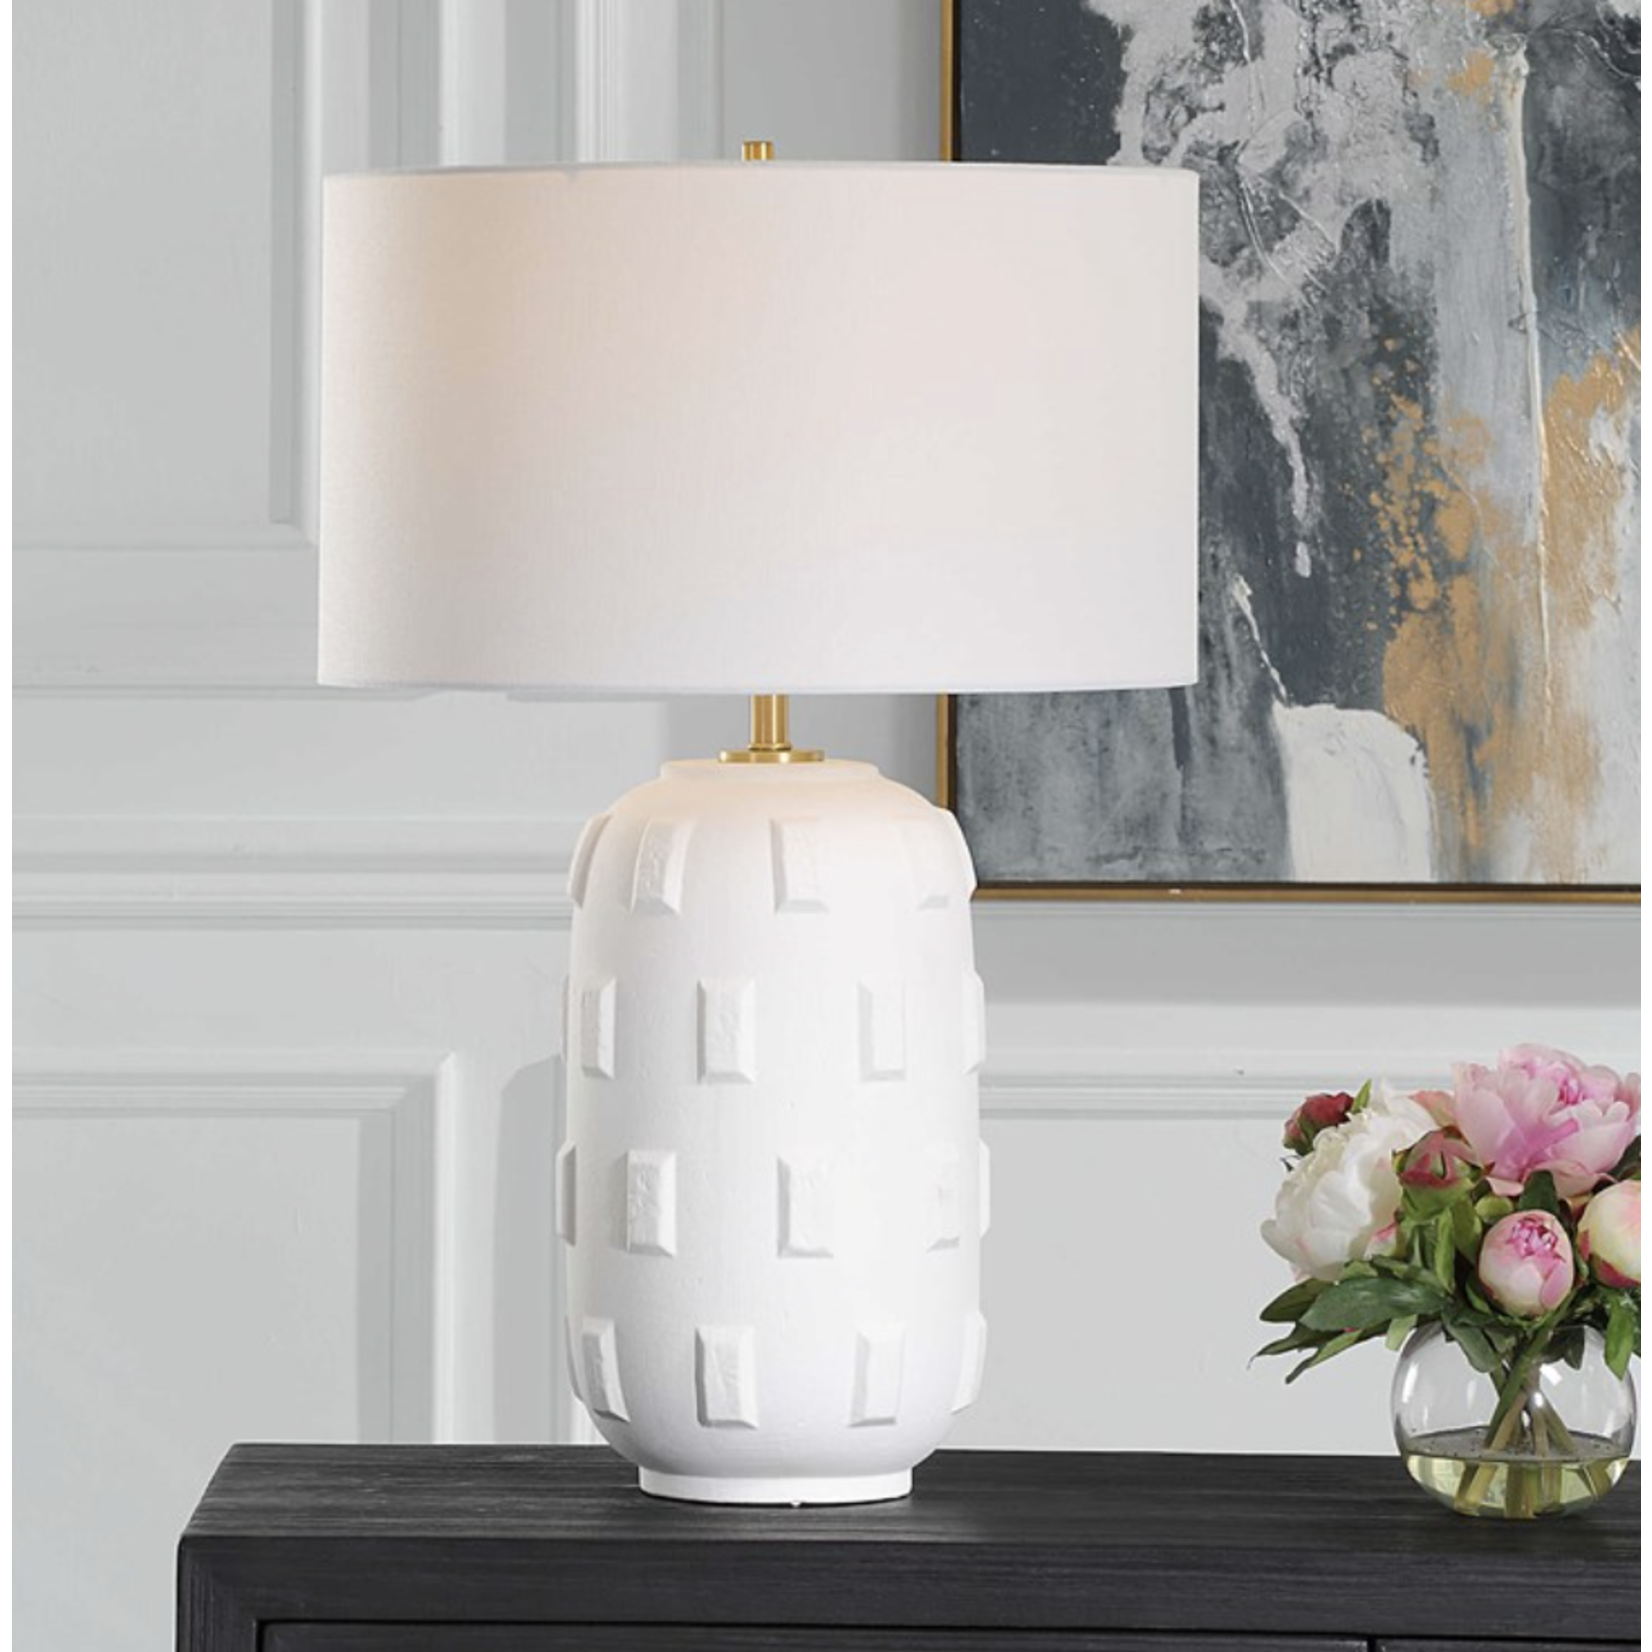 Outside The Box 26" Uttermost Emerie White Porcelain With Brick Patterns Table Lamp